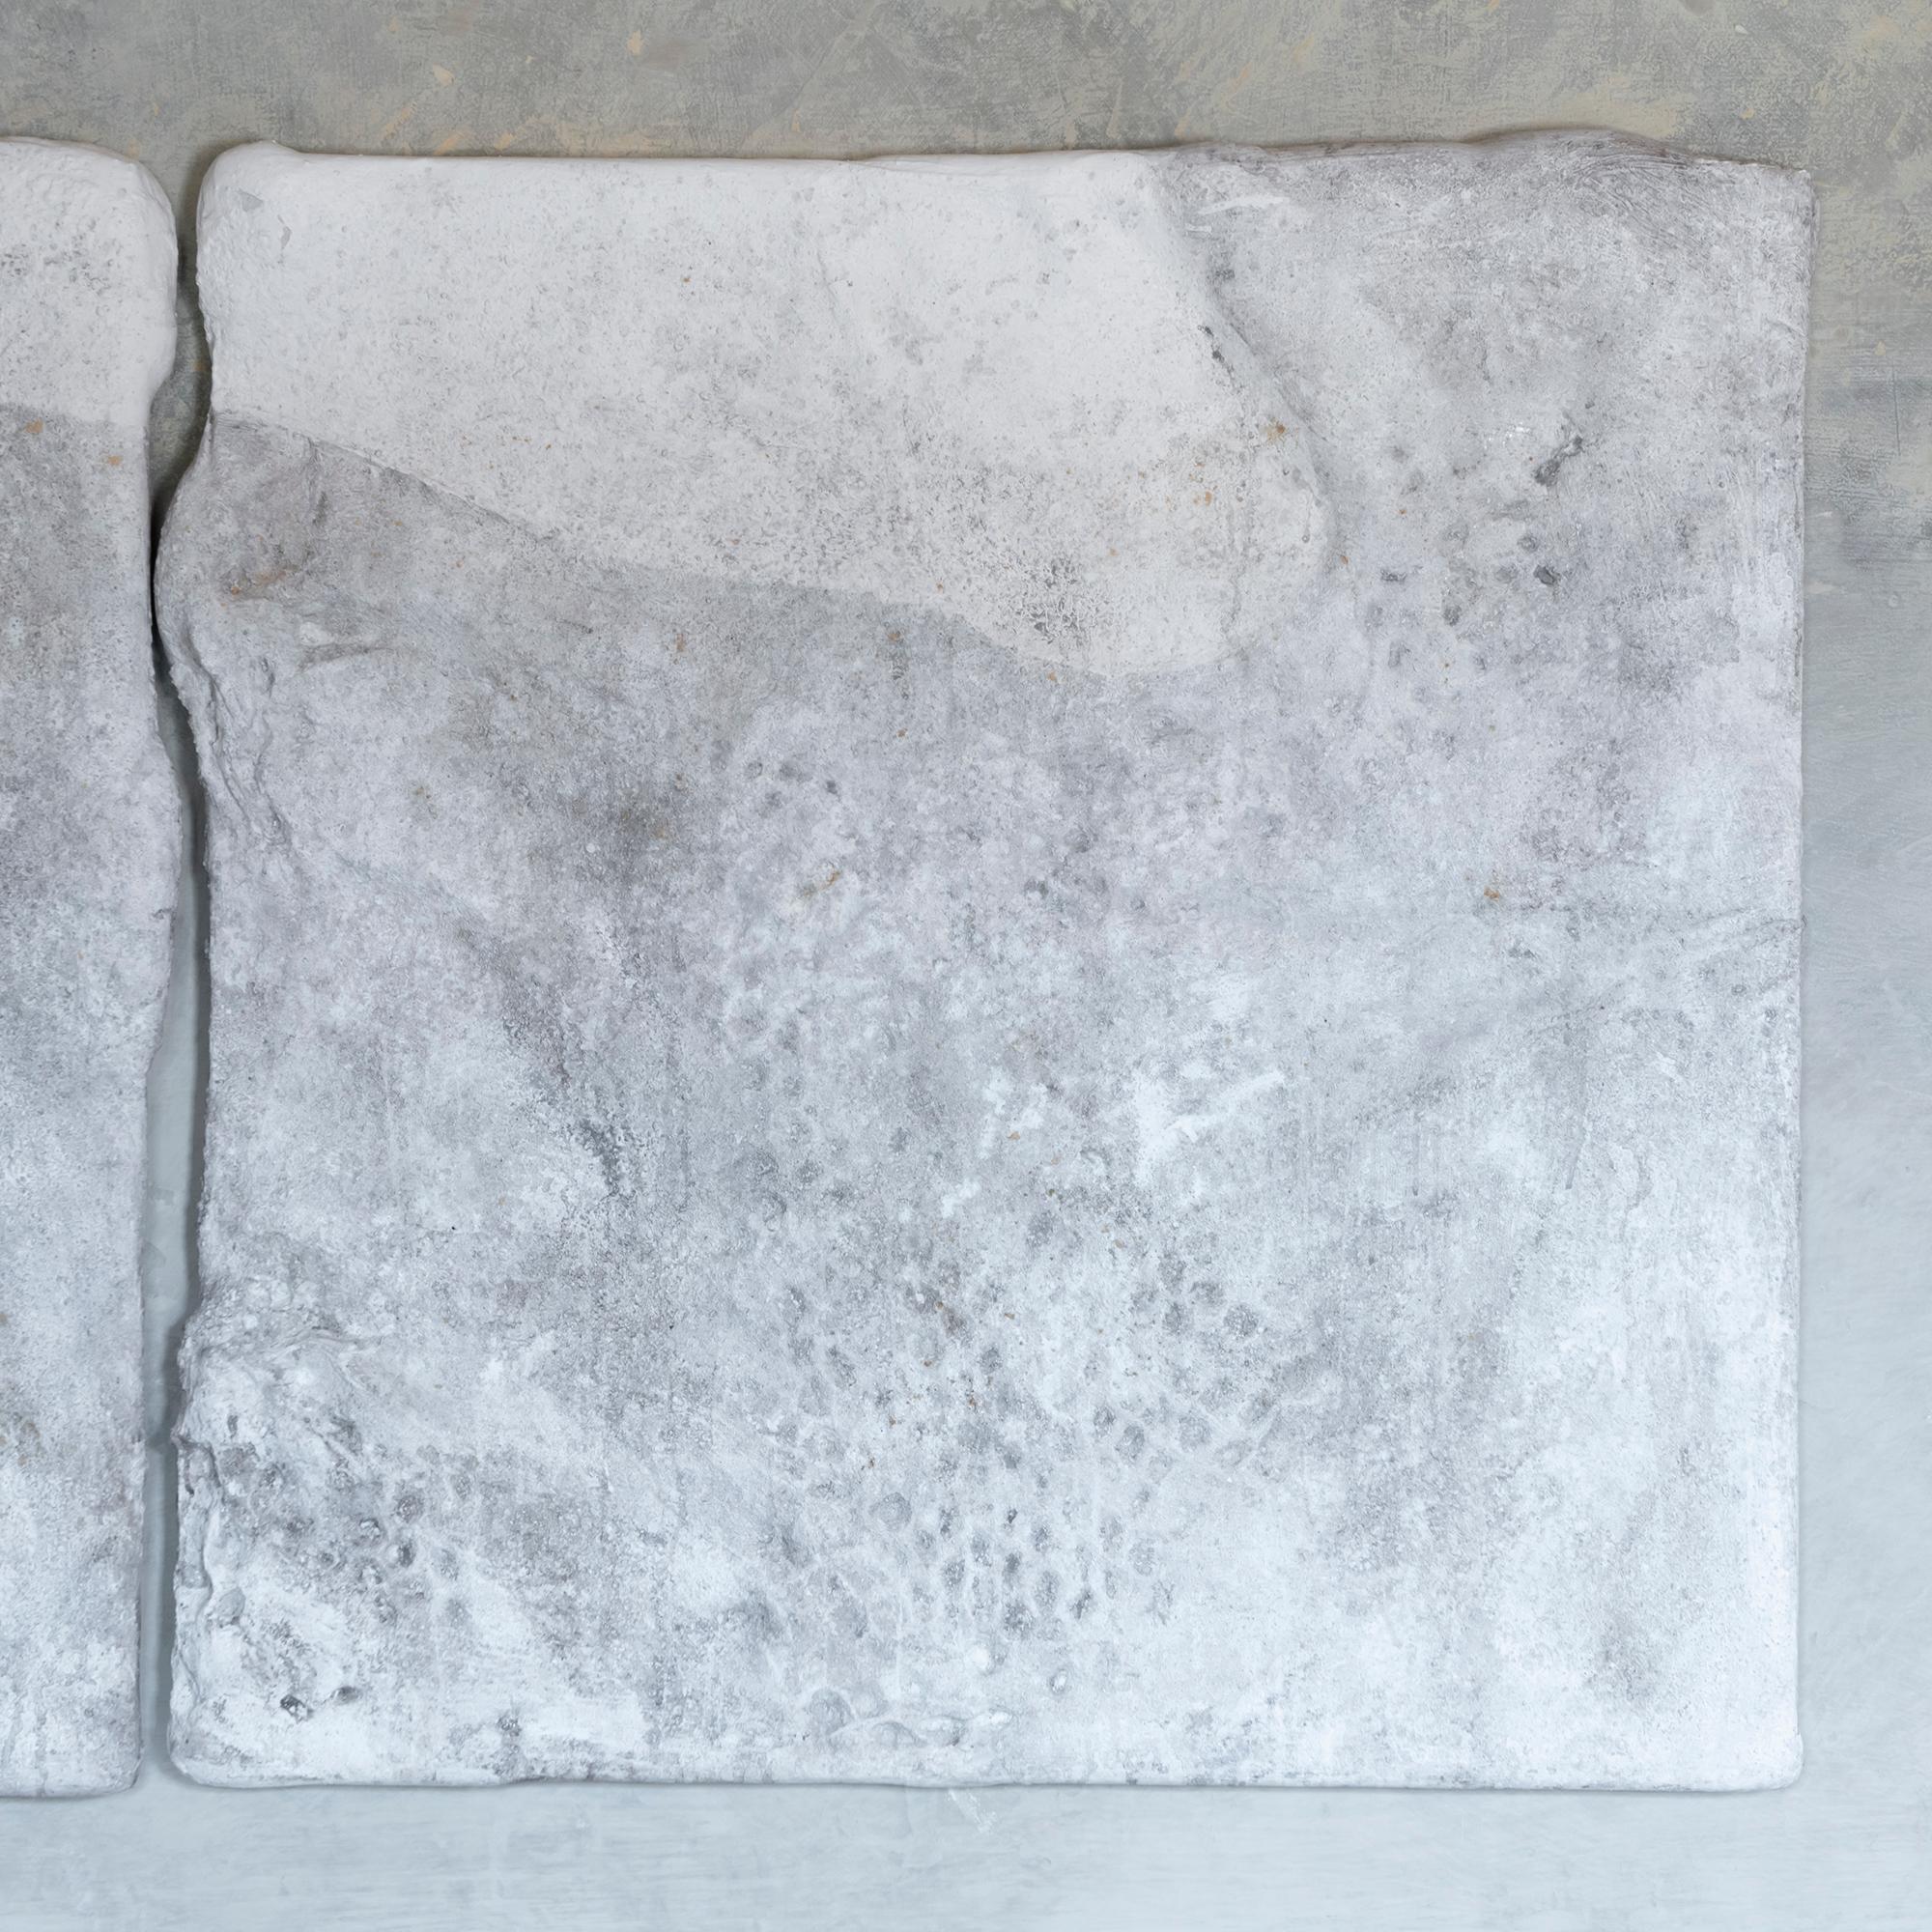 Wall art diptych realized with canvas over foam rubber, honey comb cardboard and wood frame, plaster and white and light grey water paint, measure of each panel cm 104 x 7 x H. 104, by Matteo Giampaglia, Italy, 2020.